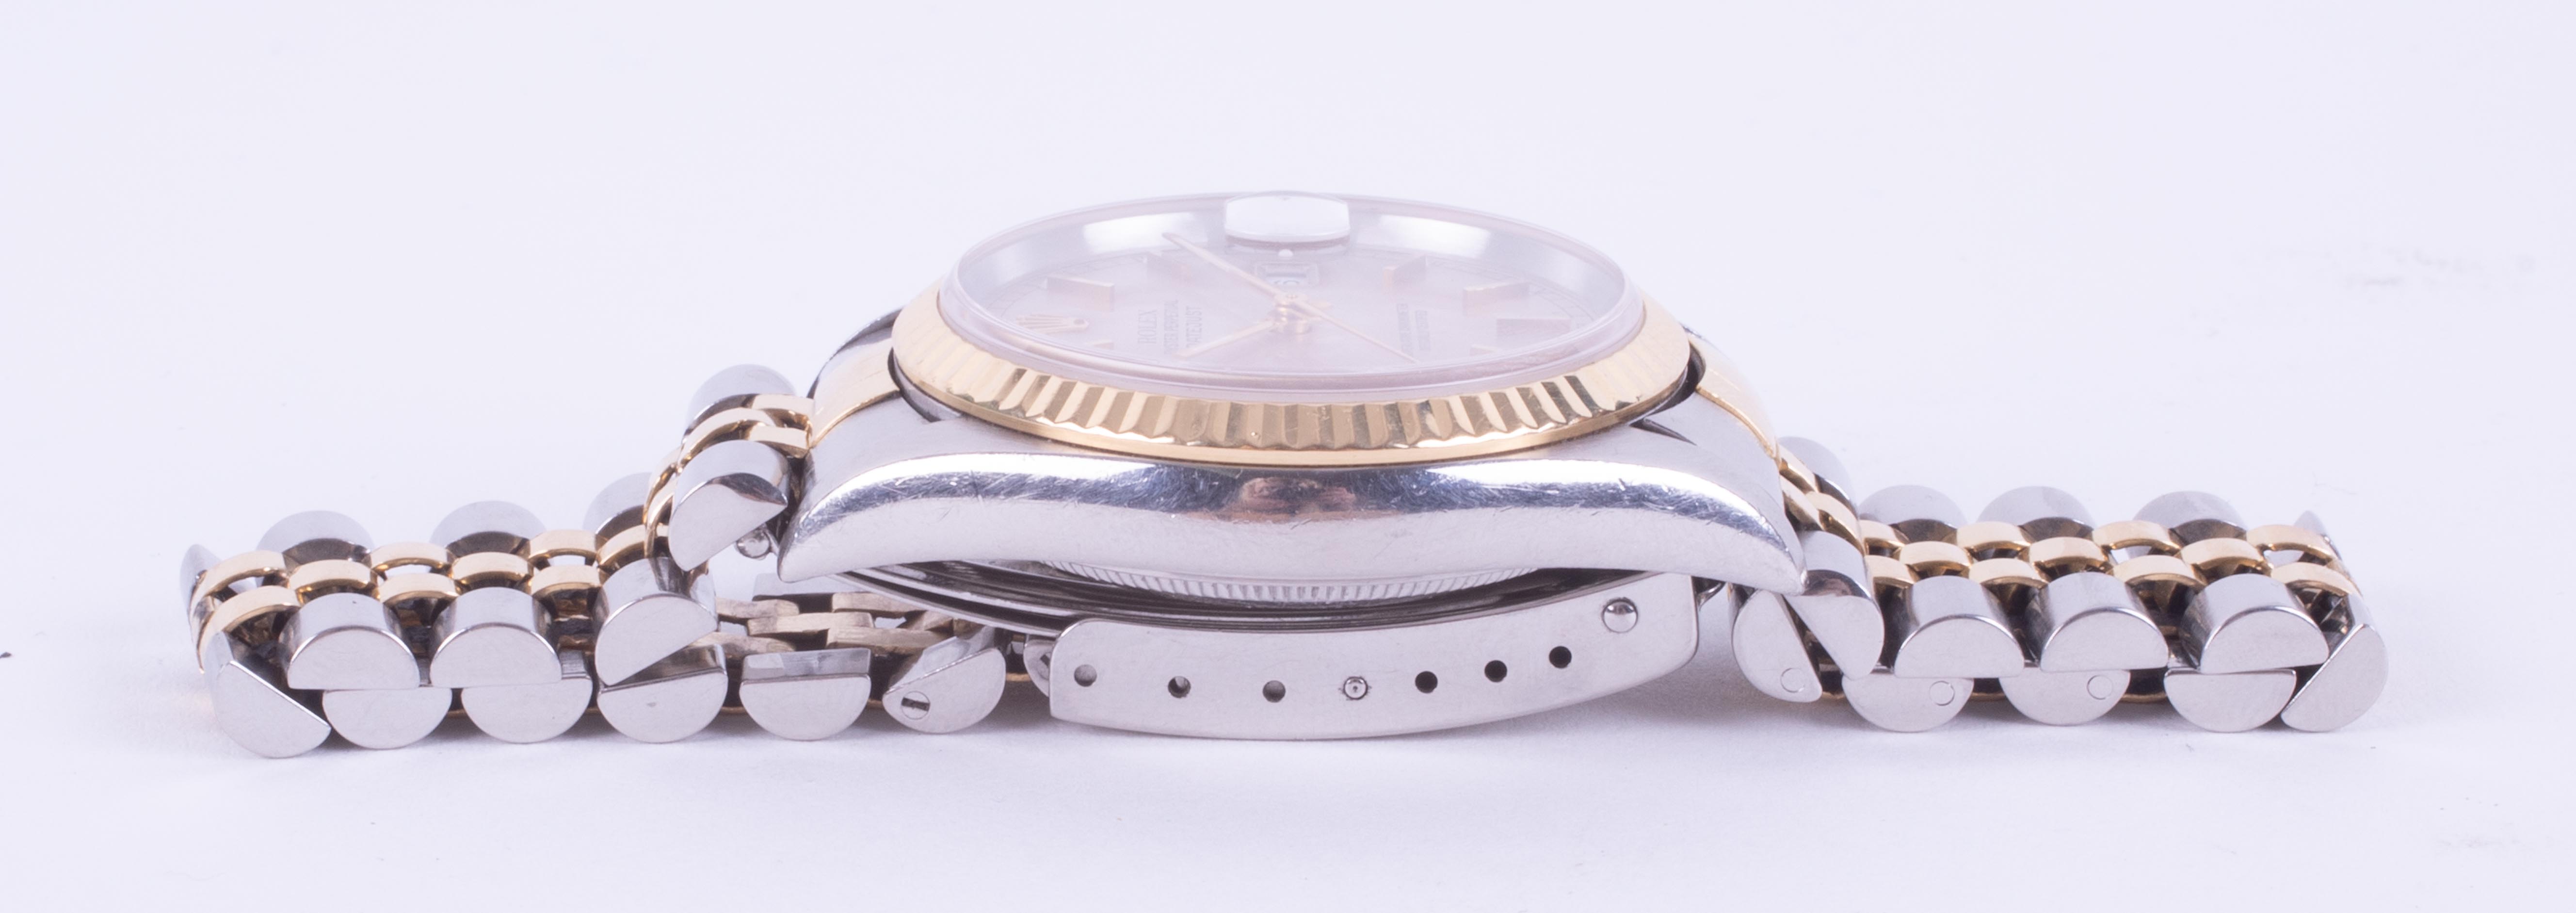 Rolex, a gent's Oyster Perpetual Datejust serial number T900228, model number 16233 in bi-metal with - Image 5 of 6